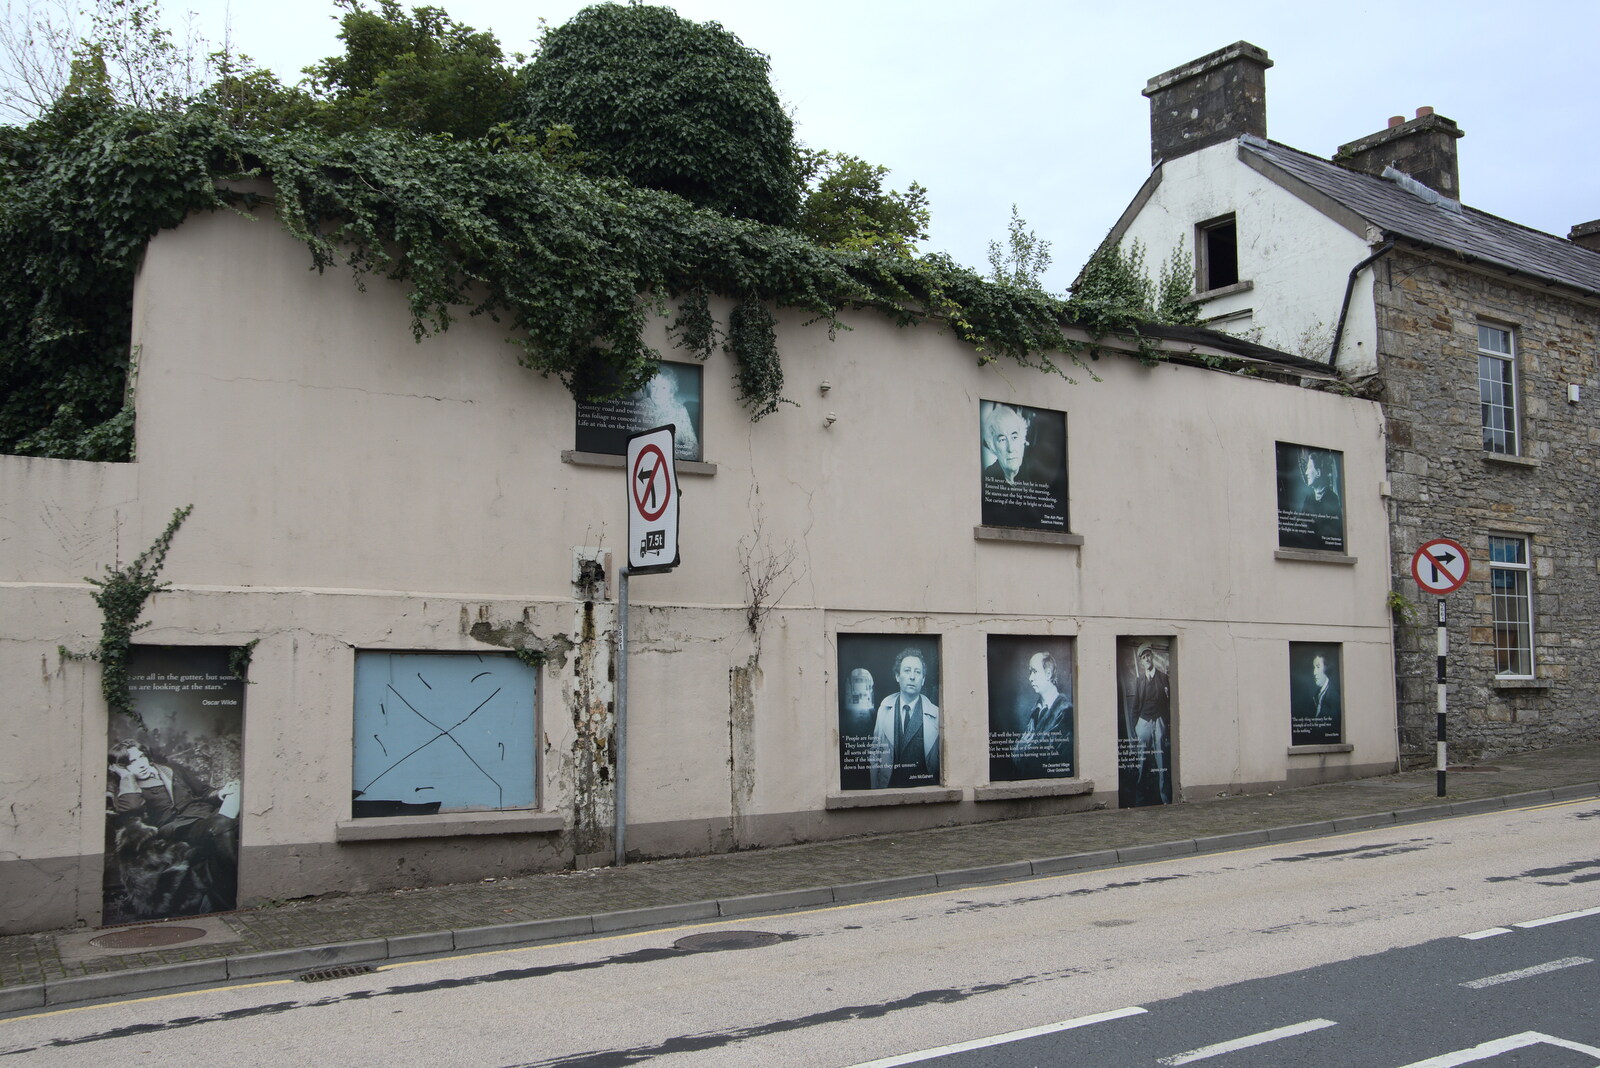 A Trip to Manorhamilton, County Leitrim, Ireland - 11th August 2021: Another roof-less derelict building